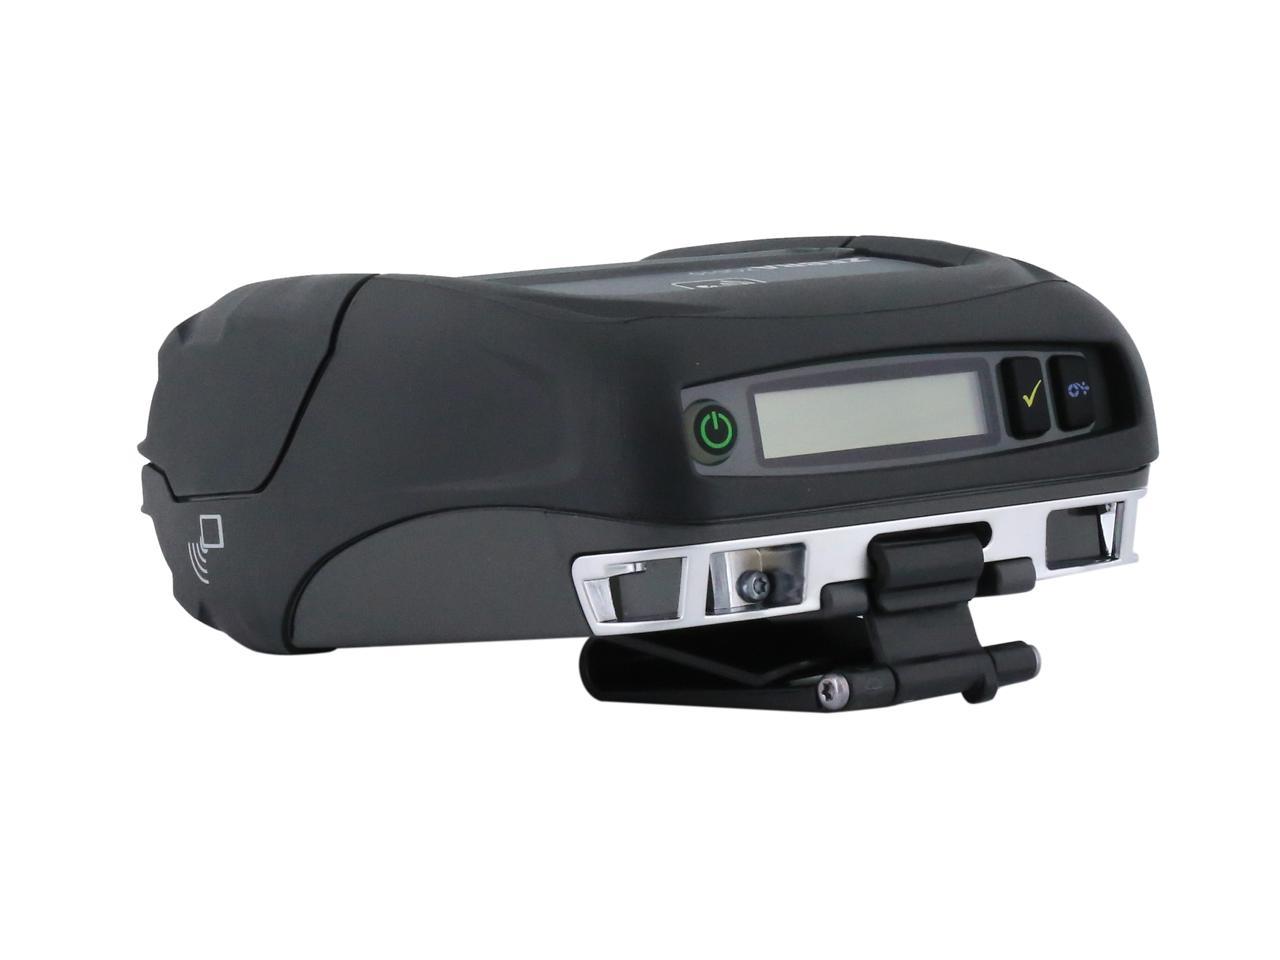 Zebra Zq510 3 Mobile Direct Thermal Receipt And Label Printer 203 Dpi Bluetooth 40 Linered 3377